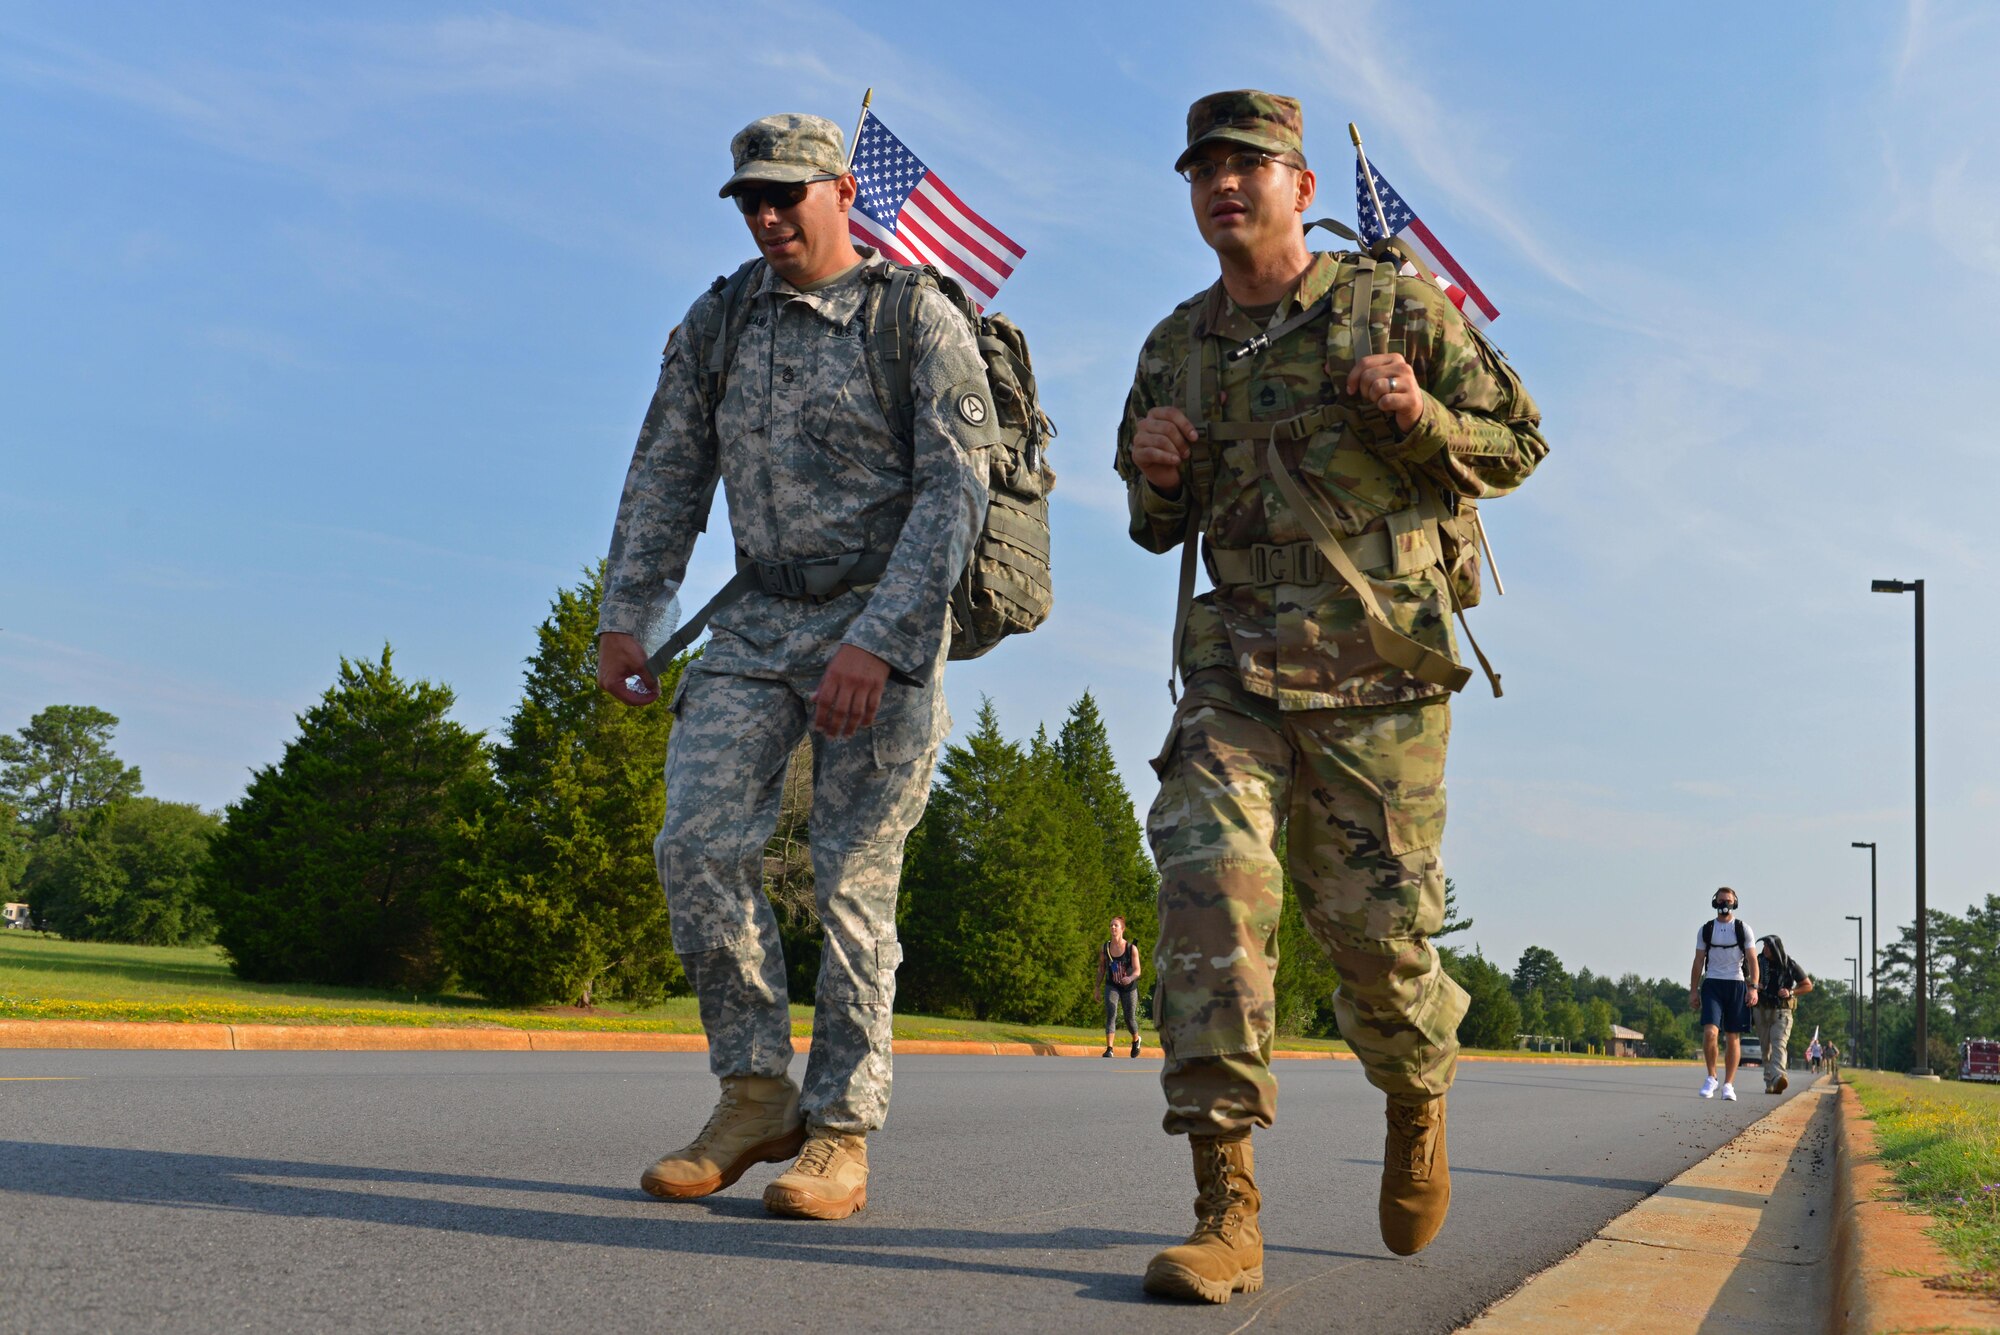 U.S. Soldiers ruck during a 9/11 Memorial Ruck/Walk at Shaw Air Force Base, S.C., Sept. 9, 2016. Participants came from all over the Shaw and Sumter communities to ruck, run, or walk 9.11 miles together to honor those who lost their lives on 9/11. (U.S. Air Force photo by Airman 1st Class Destinee Sweeney)